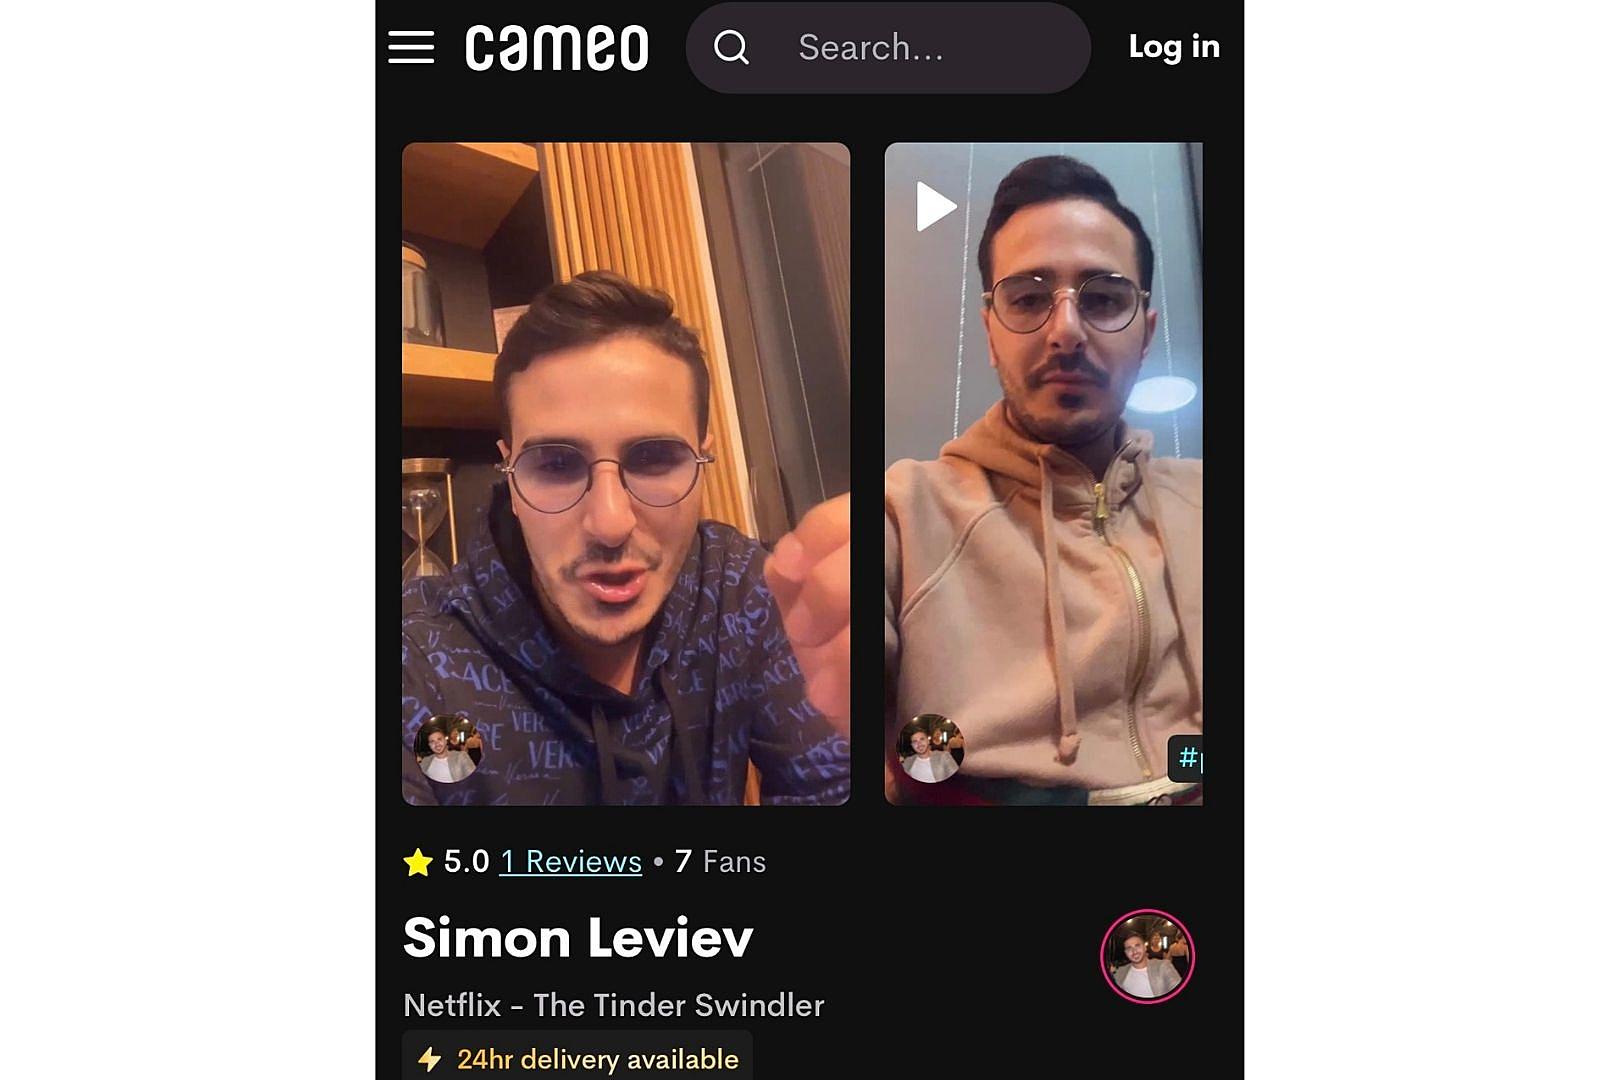 Tinder Swindler Simon Leviev Wants His Own Dating Show